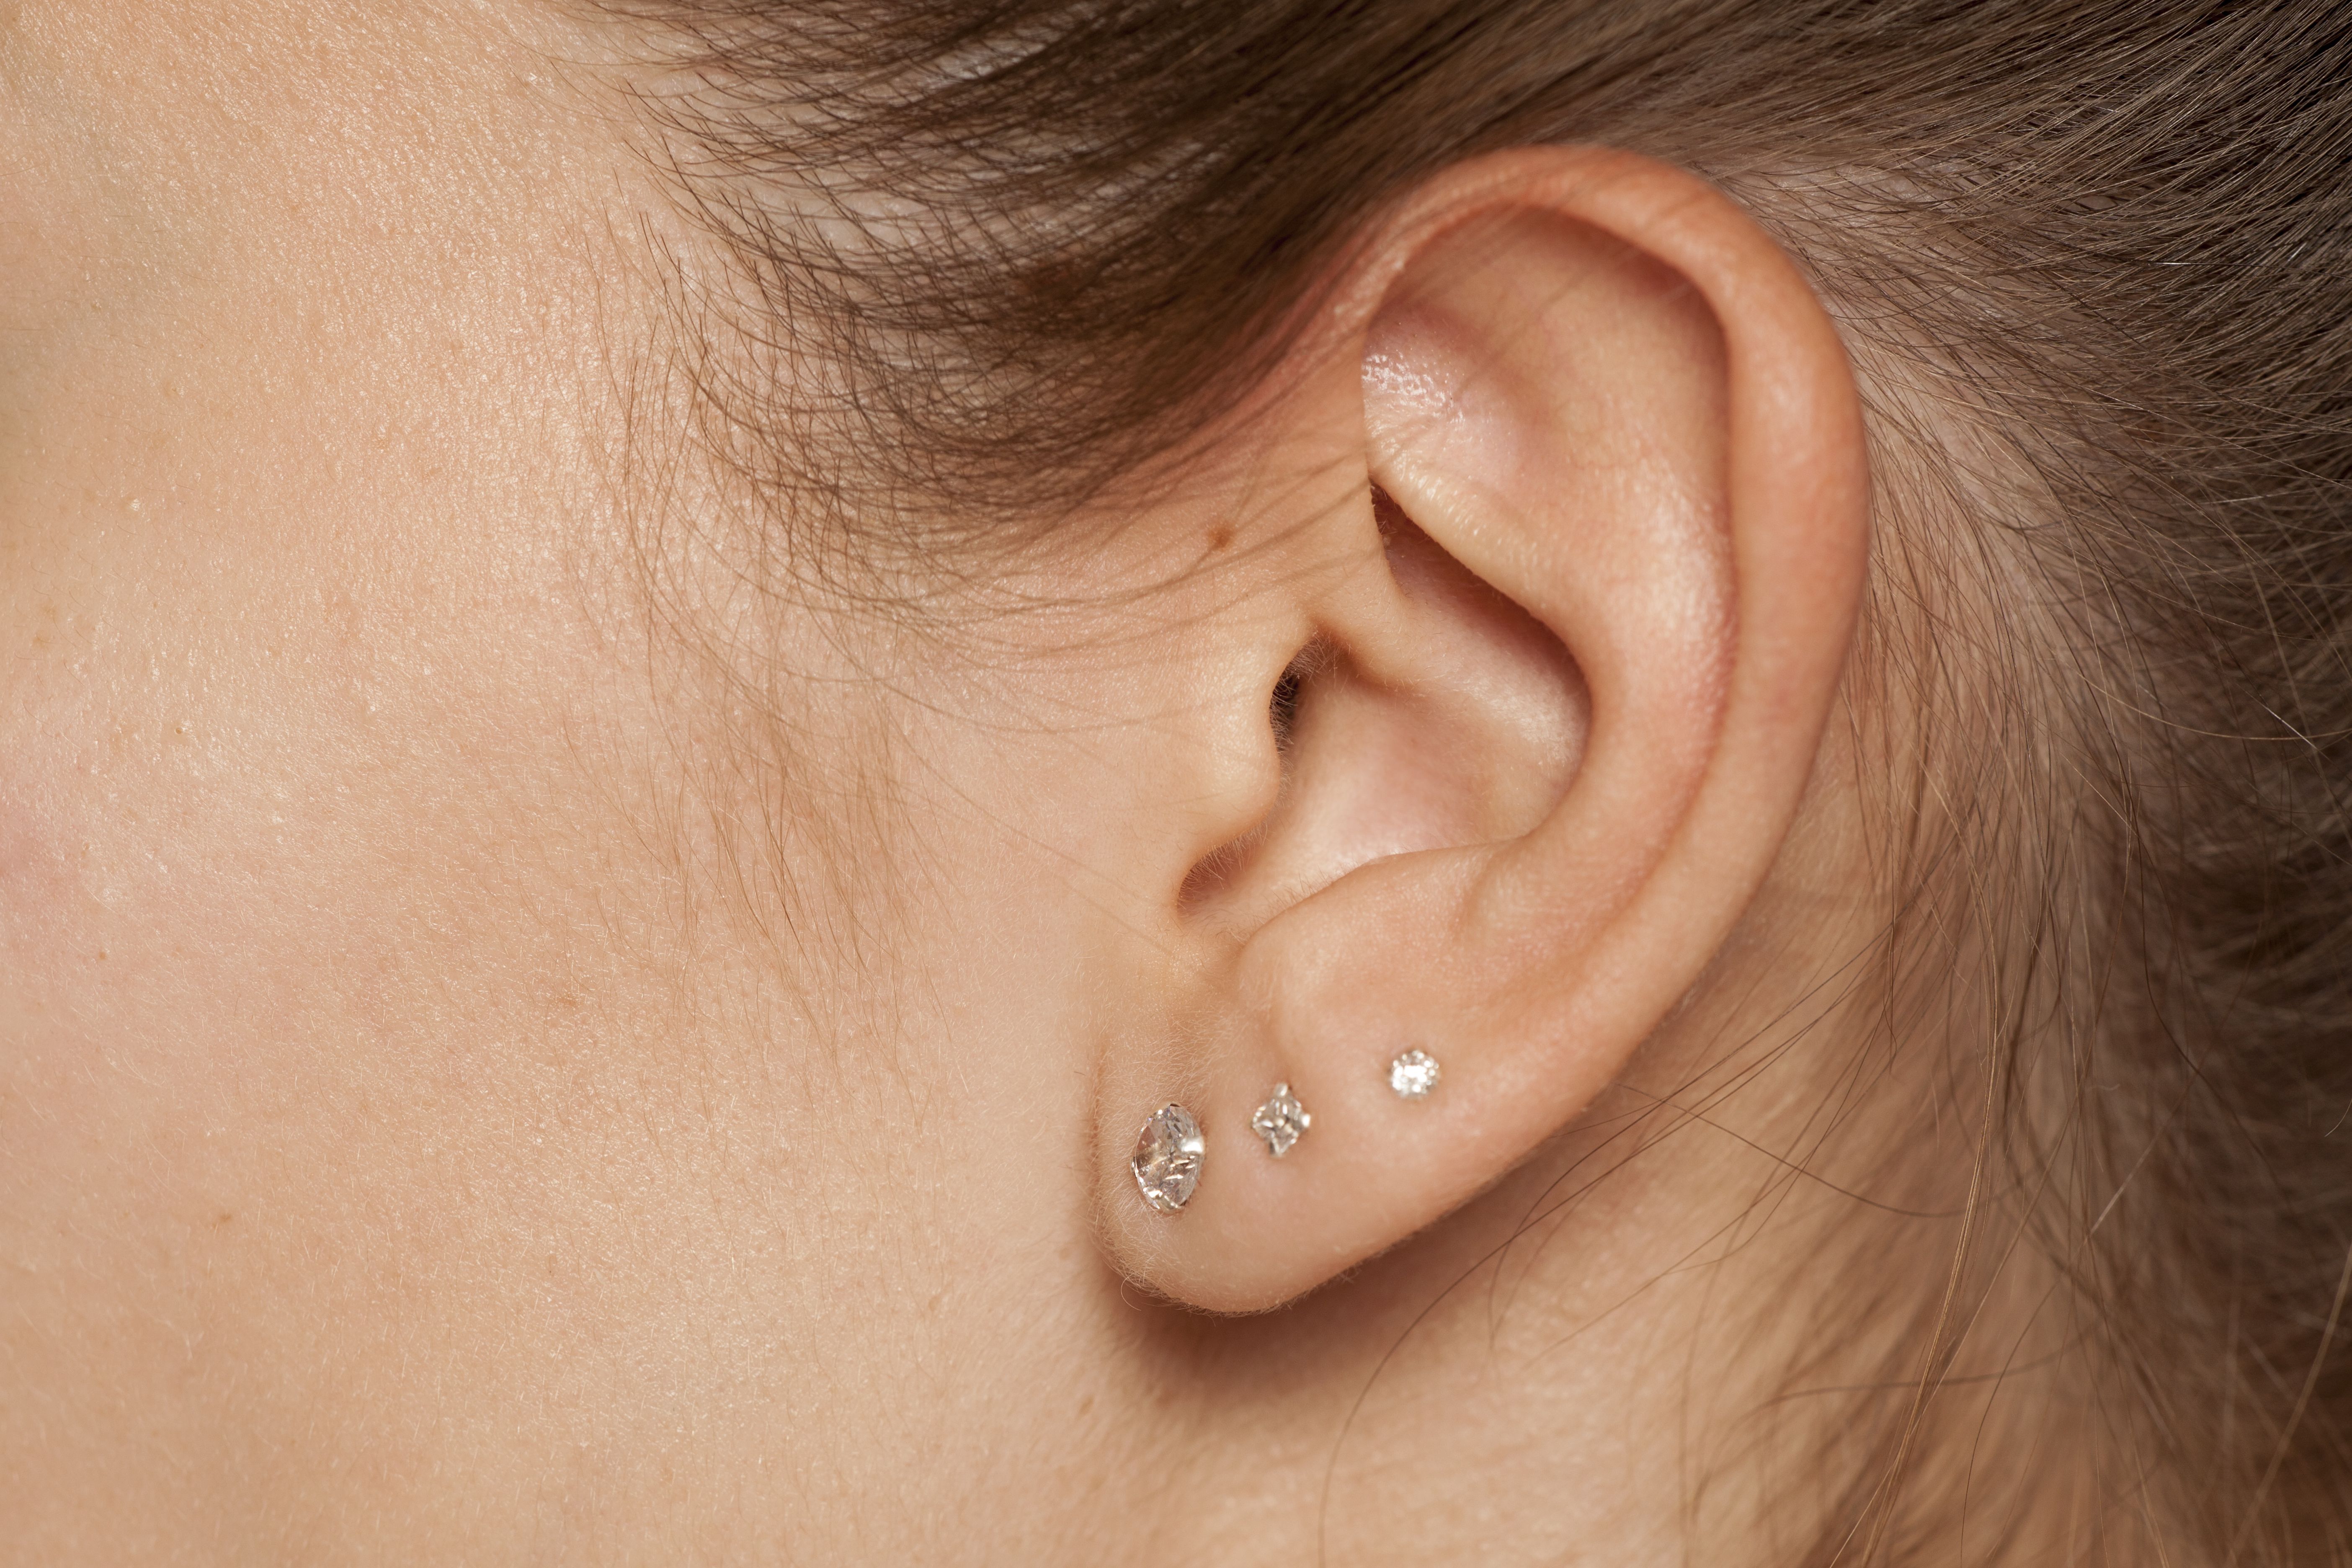 The Right Way to Clean Your Earring Hole, According to Dermatologists